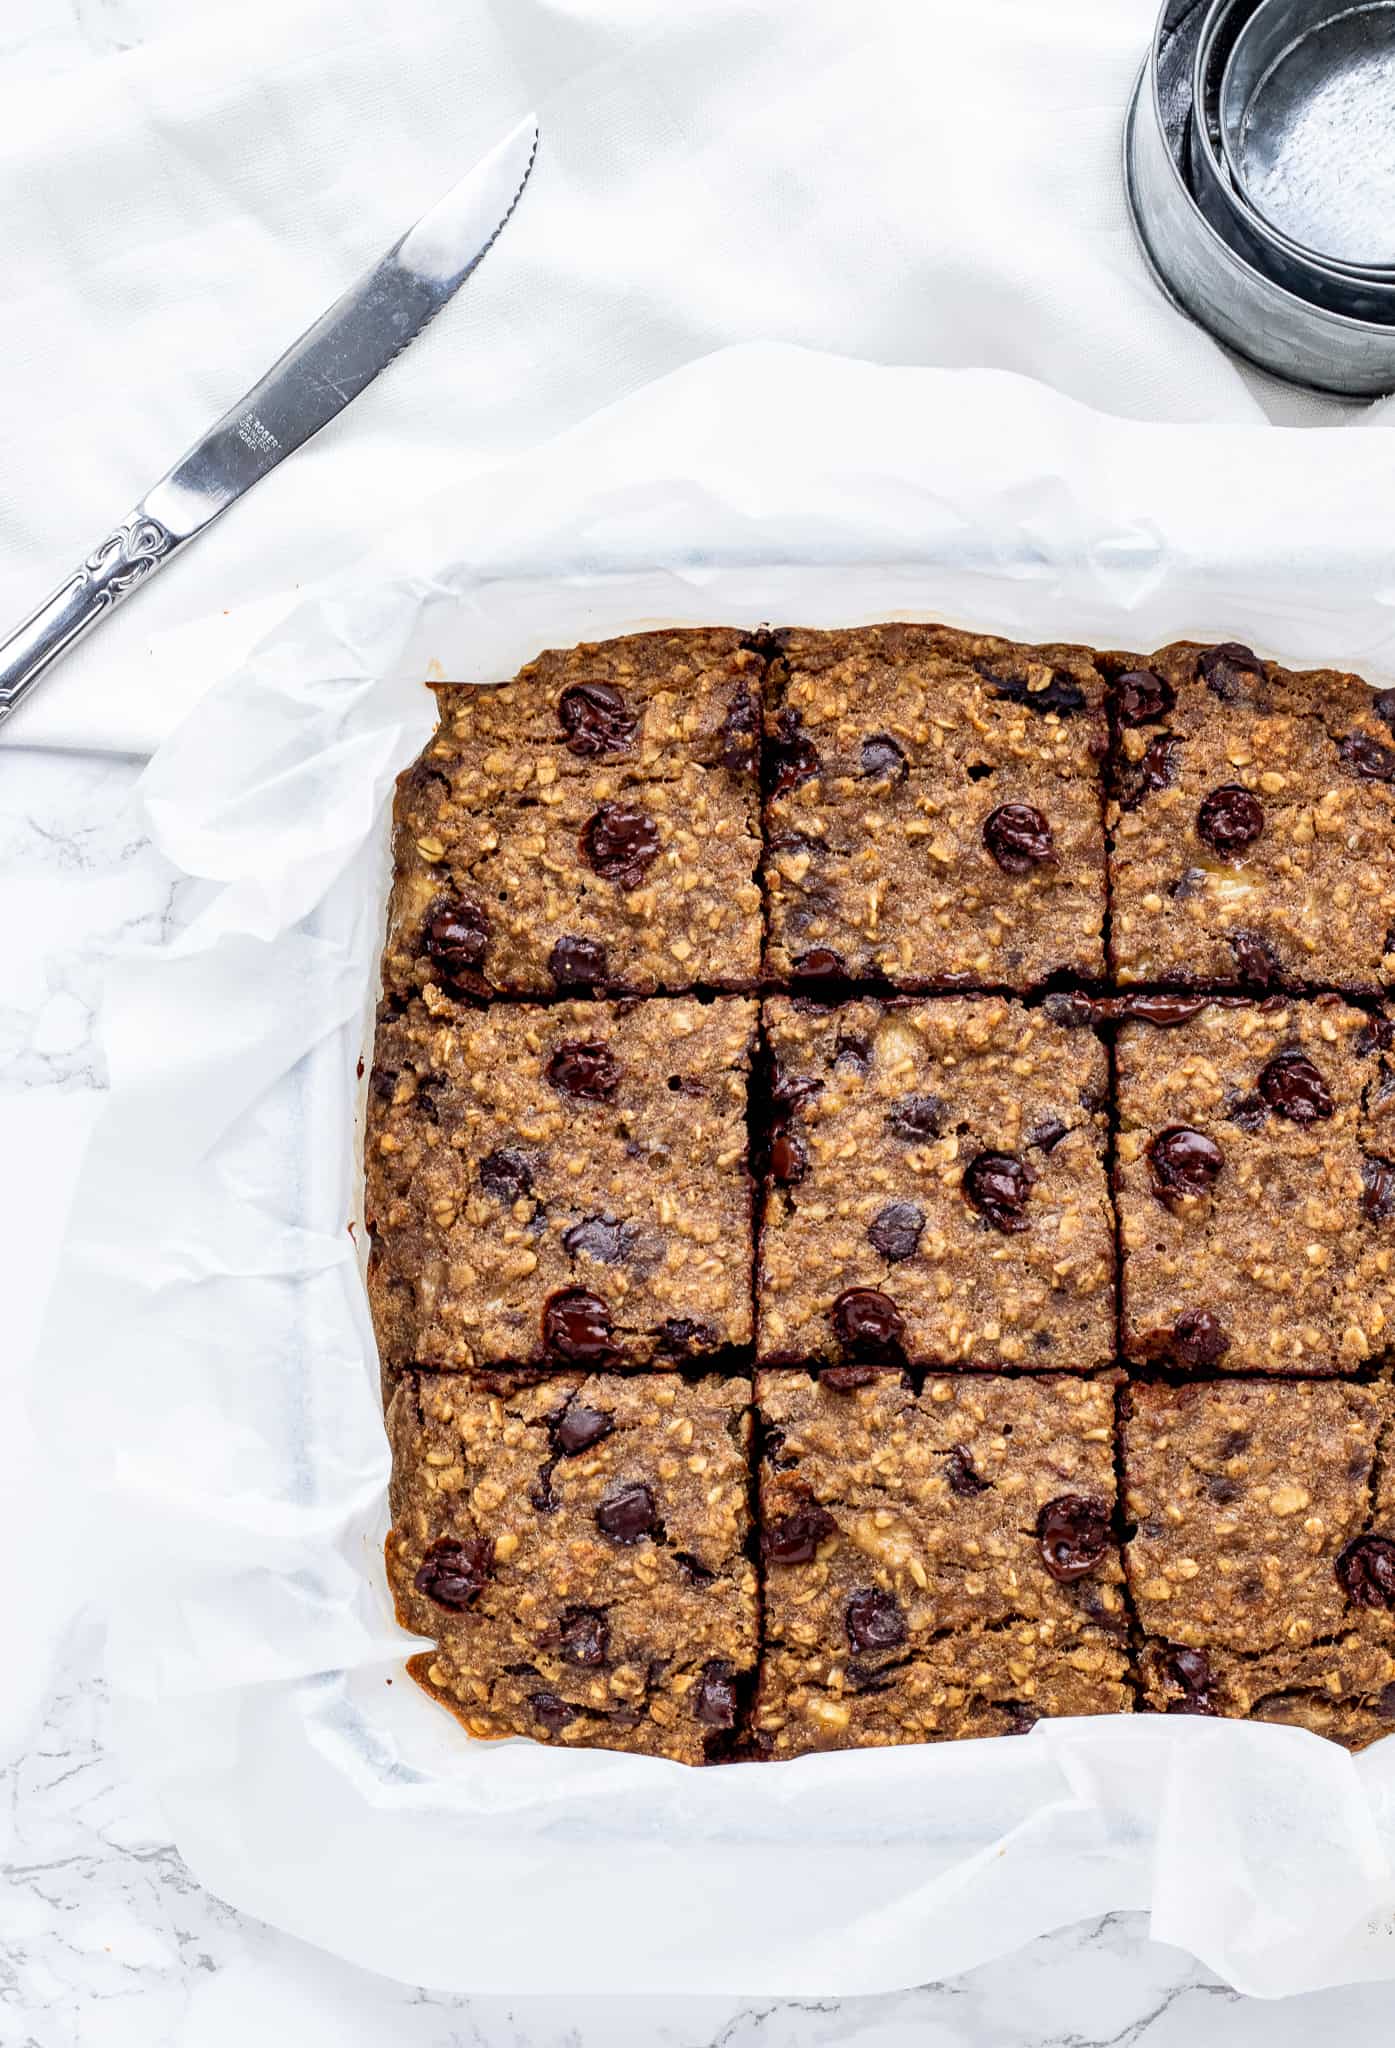 The baked oatmeal mixture cut into bars in a pan on parchment paper.